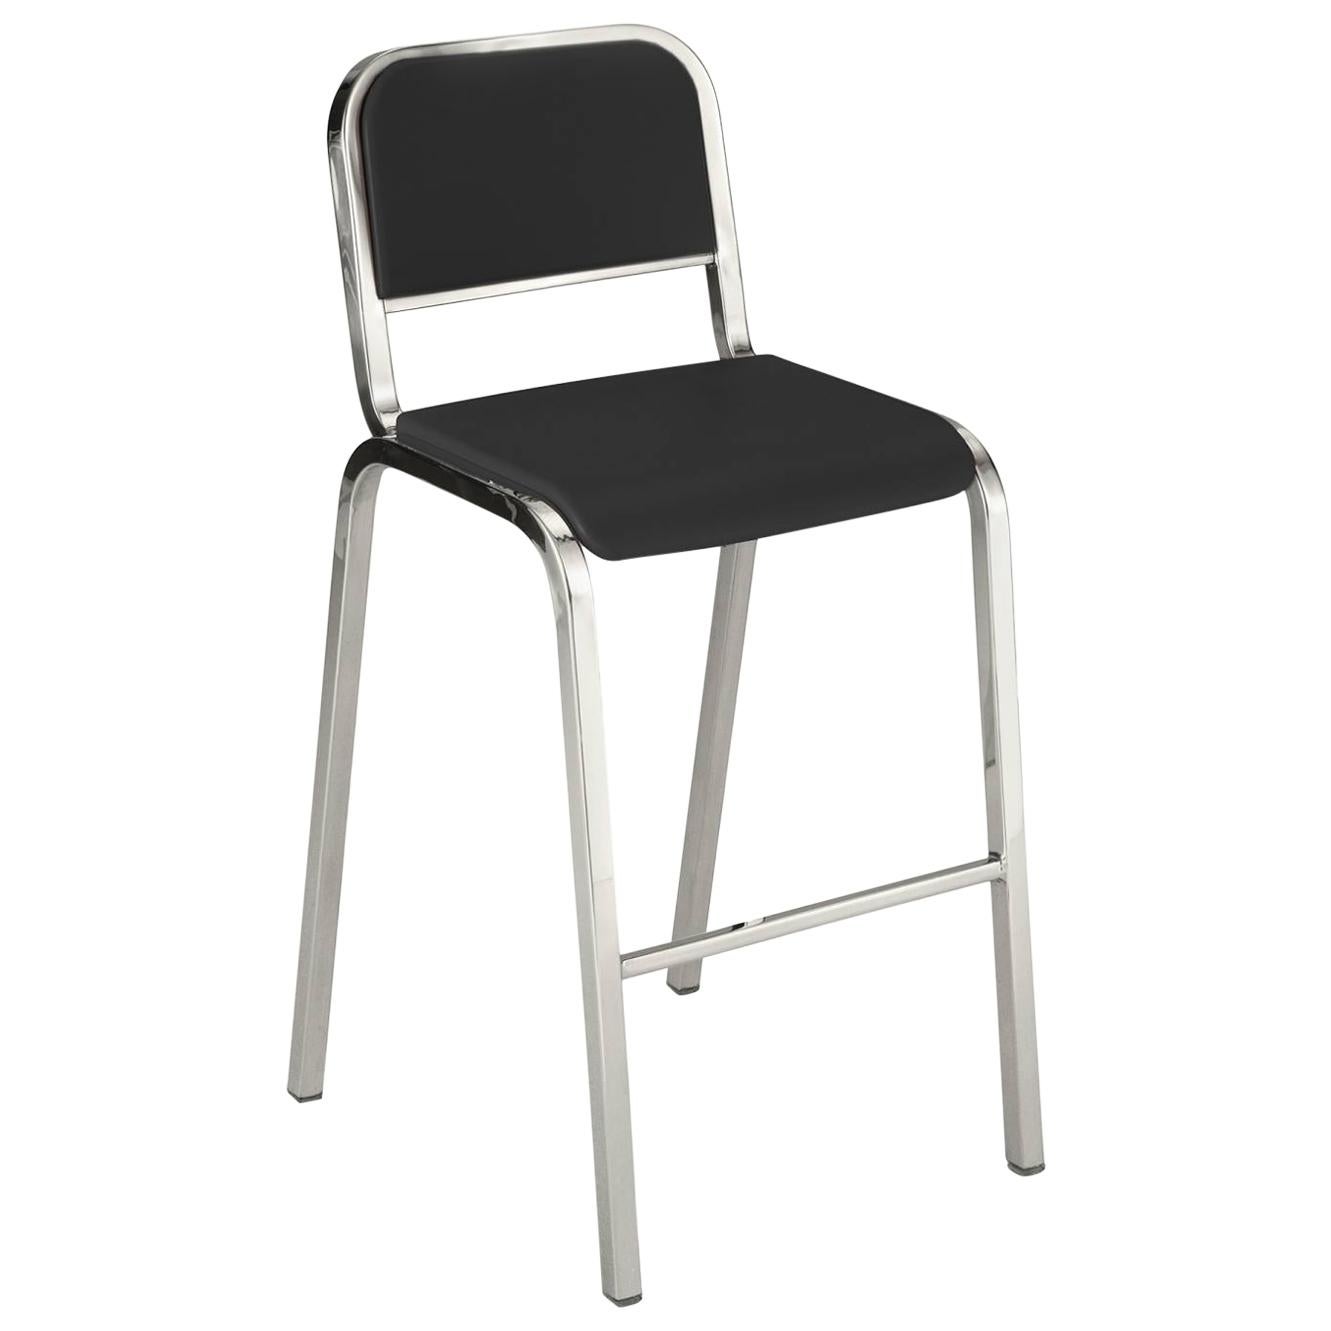 Emeco Nine-0 Barstool in Polished Aluminum and Gray by Ettore Sottsass